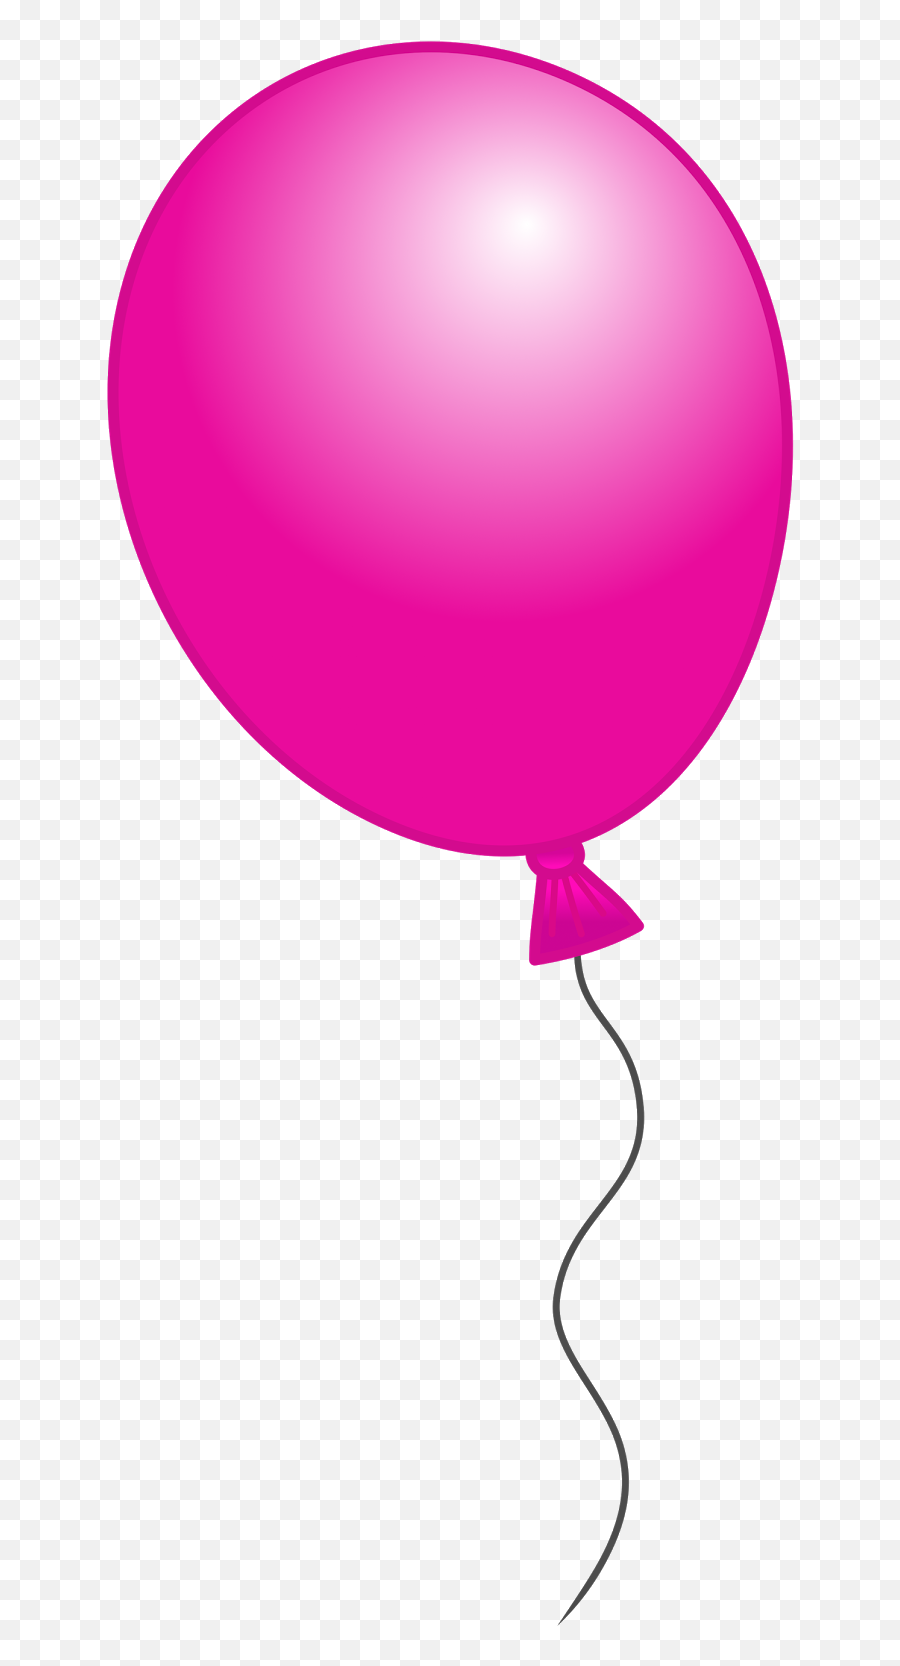 Clipart Png Collection Balloon 28105 - Free Icons And Png Pink Birthday Balloon Clipart,Ballon Png